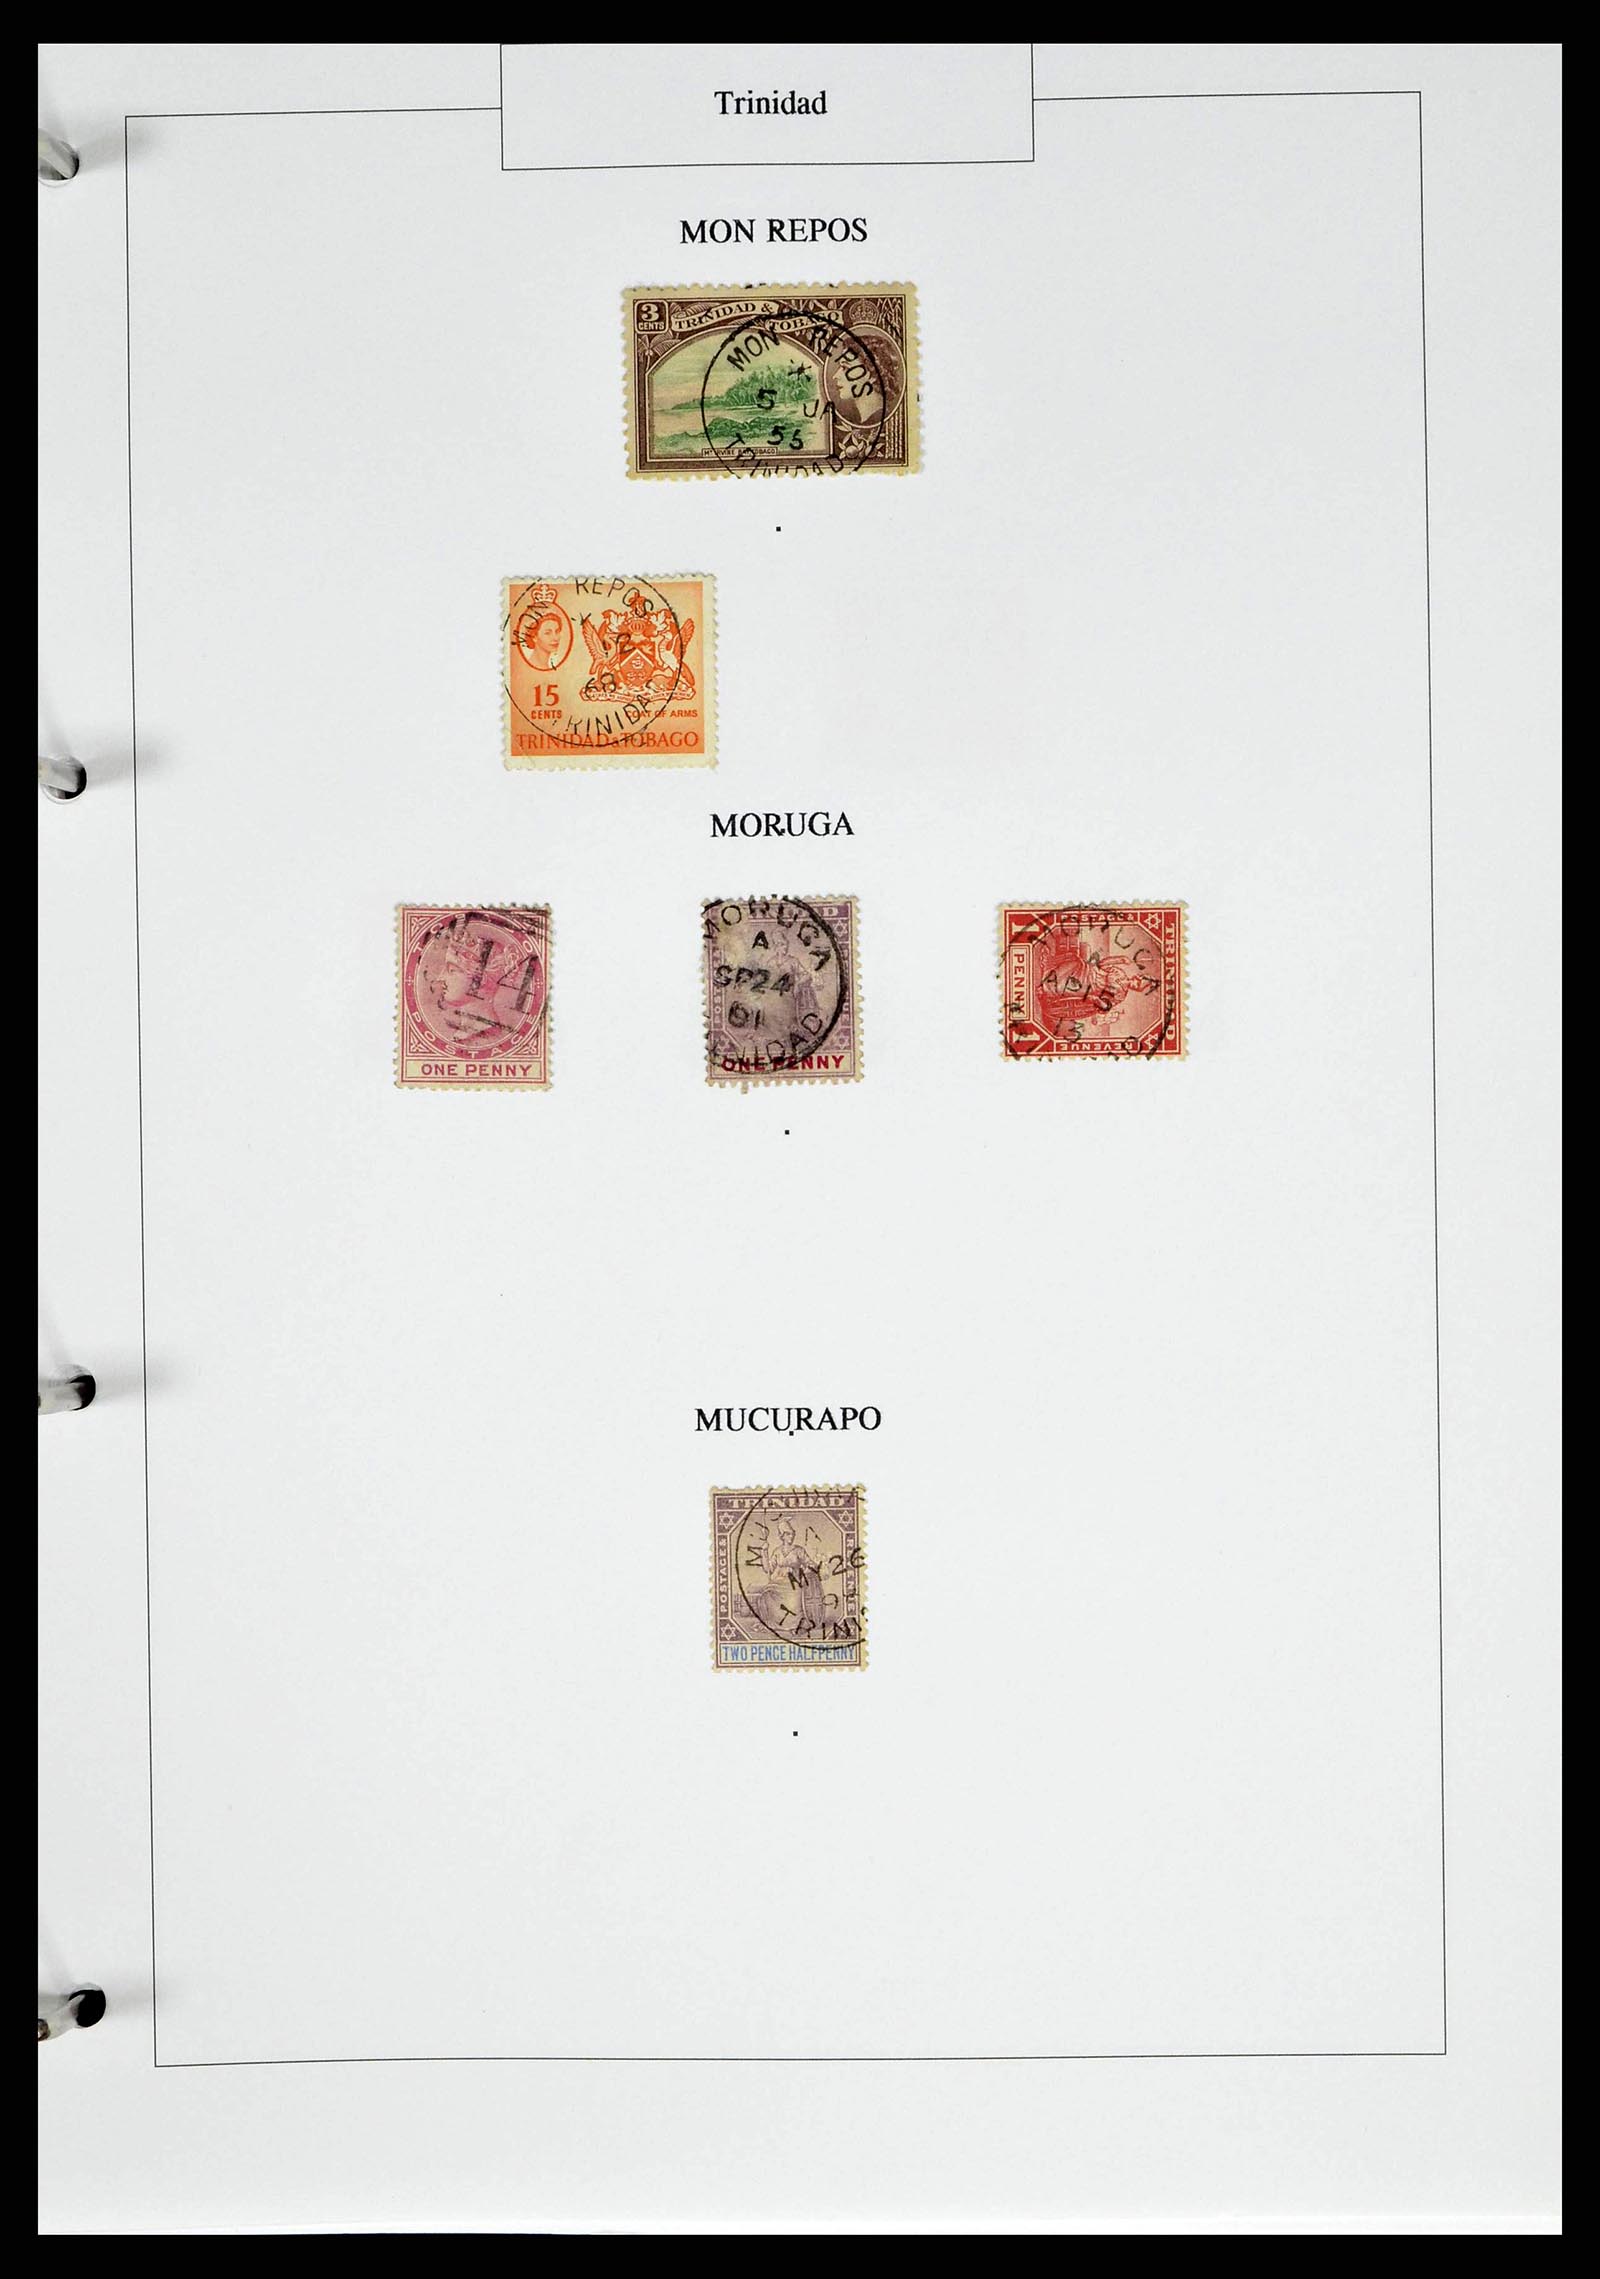 38481 0034 - Stamp collection 38481 Trinidad and Tobago cancels 1859-1960.